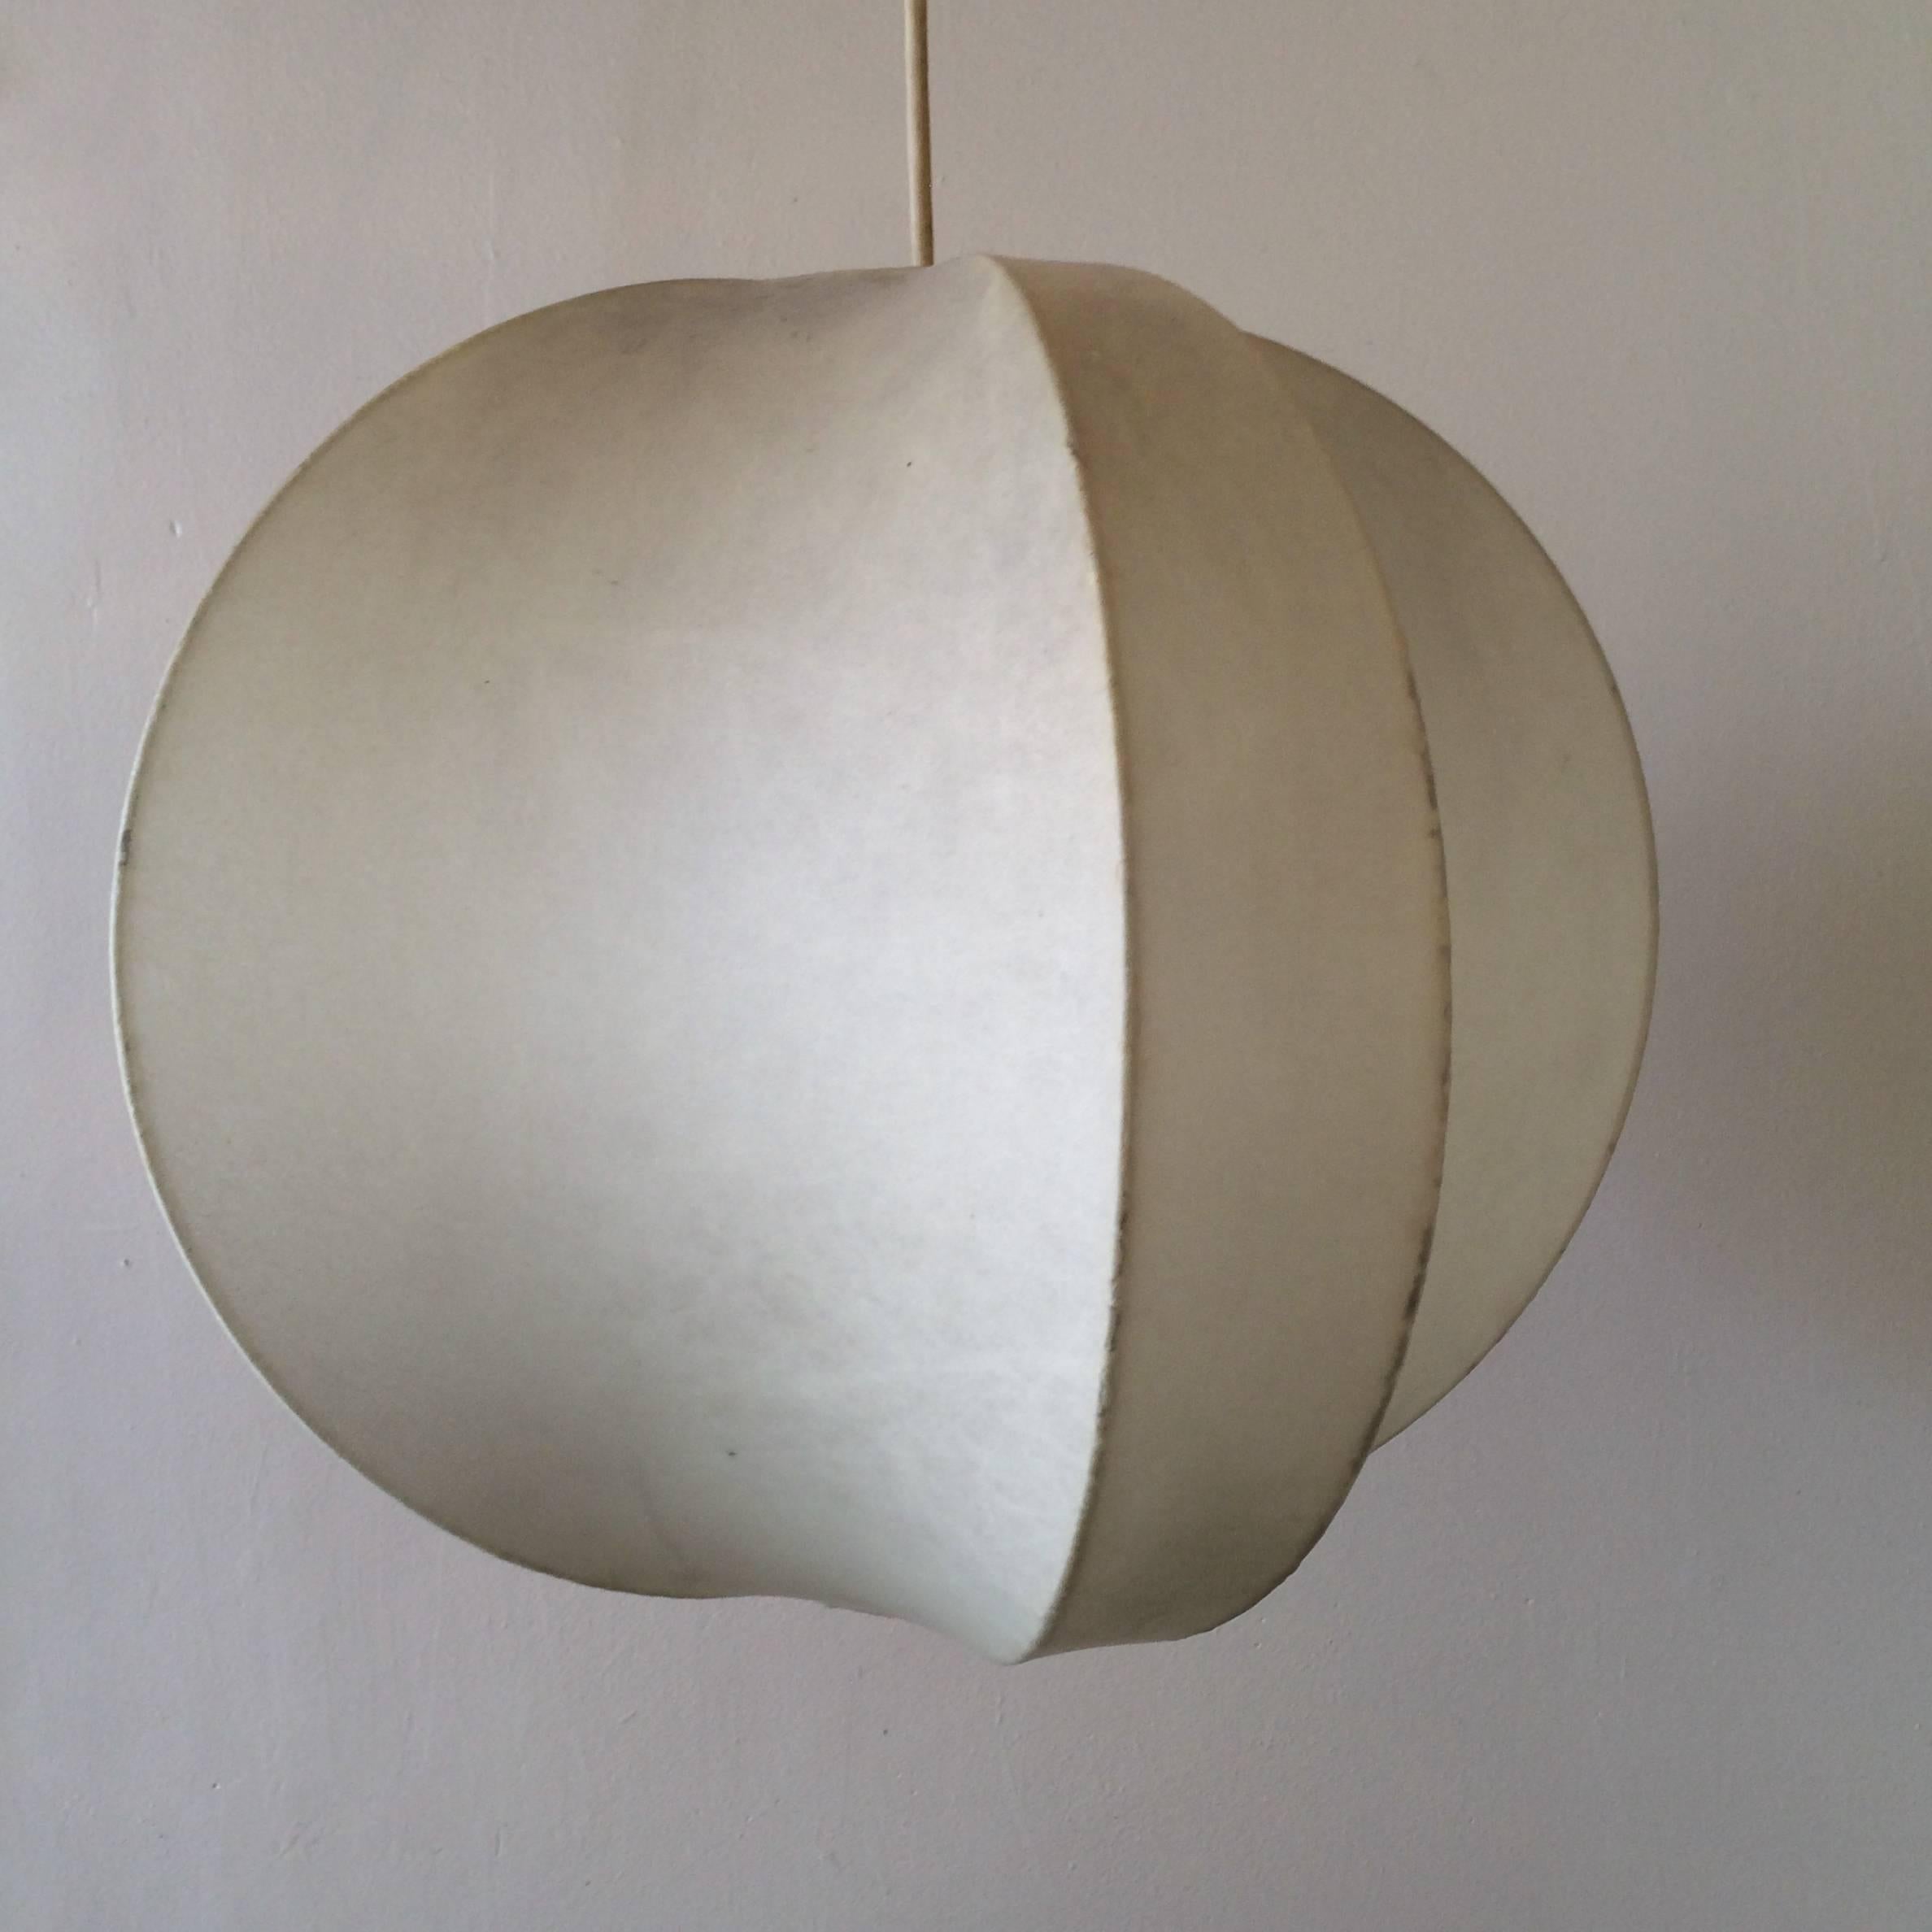 Cocoon pendant lamp in the style of Castiglioni from the 1960s. Built from the same materials as the George Nelson bubble lamp, this in the Italian version of that design. Having a arched on four sides form with a double wire frame, the pendant